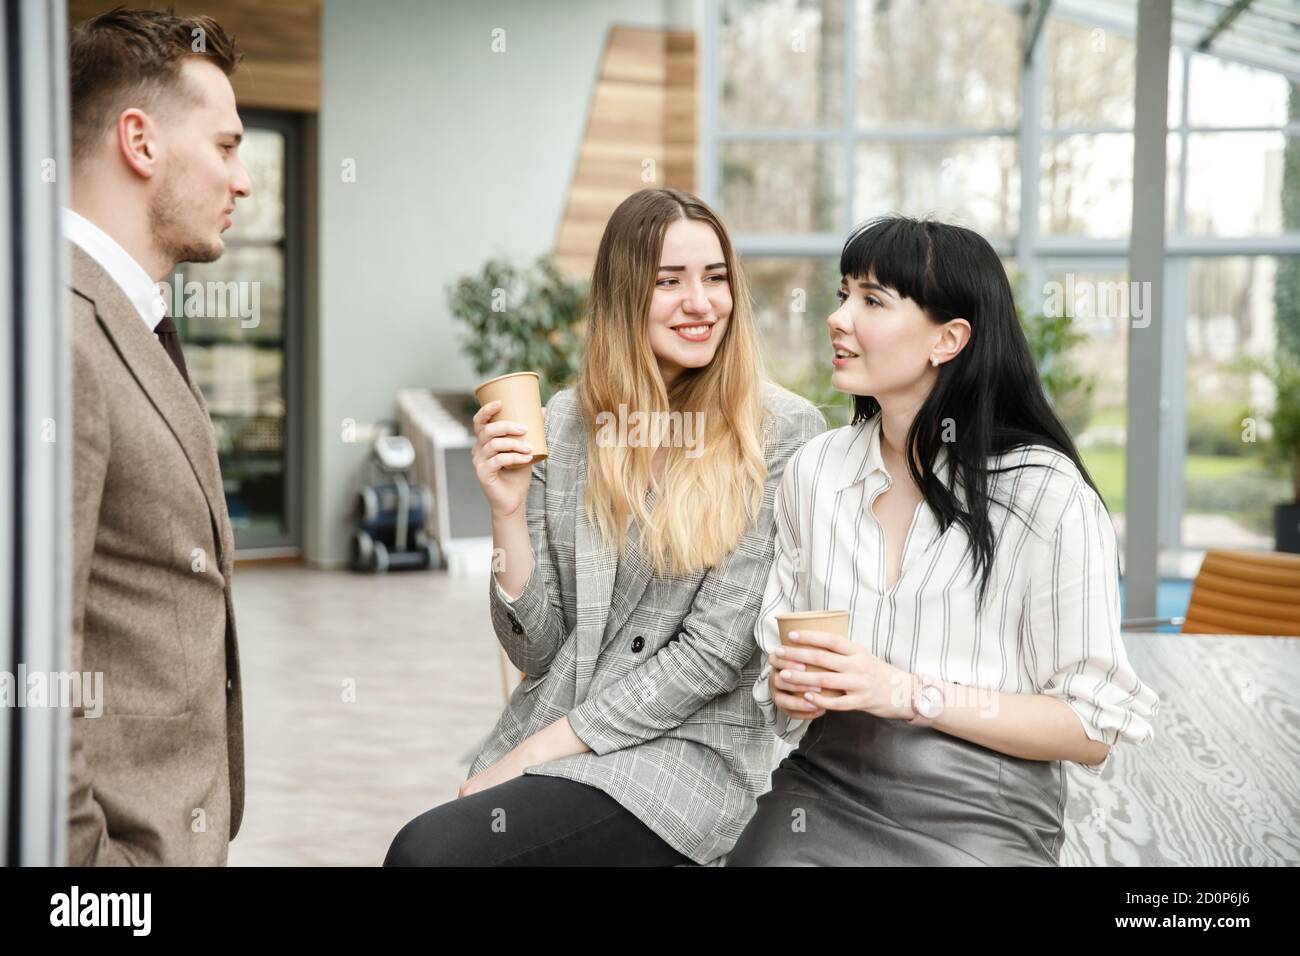 https://c8.alamy.com/comp/2D0P6J6/two-girls-are-talking-with-a-guy-they-are-sitting-in-an-office-building-2D0P6J6.jpg